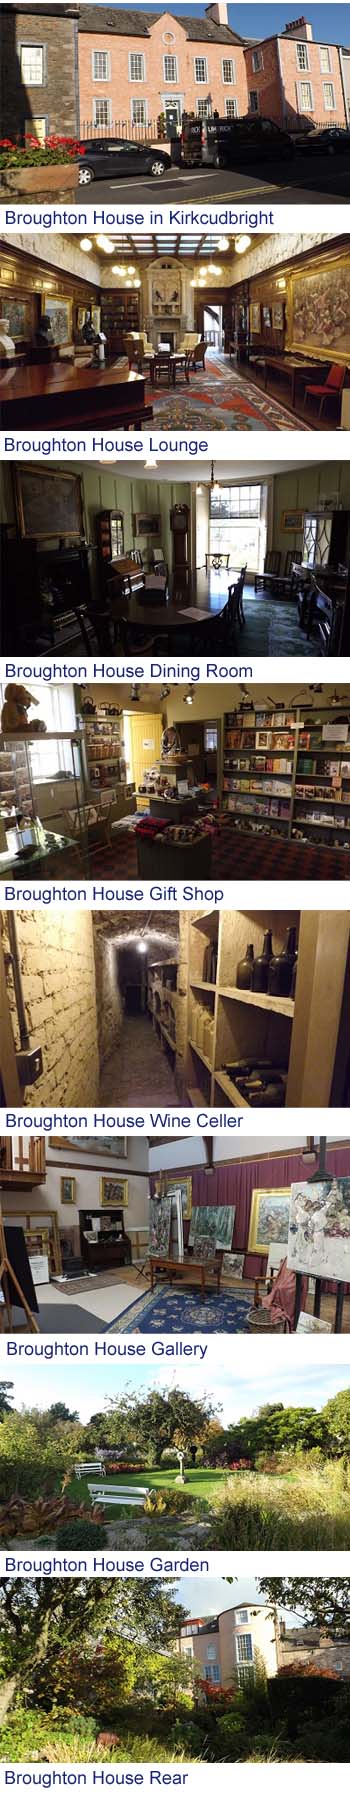 Broughton House in Kirkcudbright Images